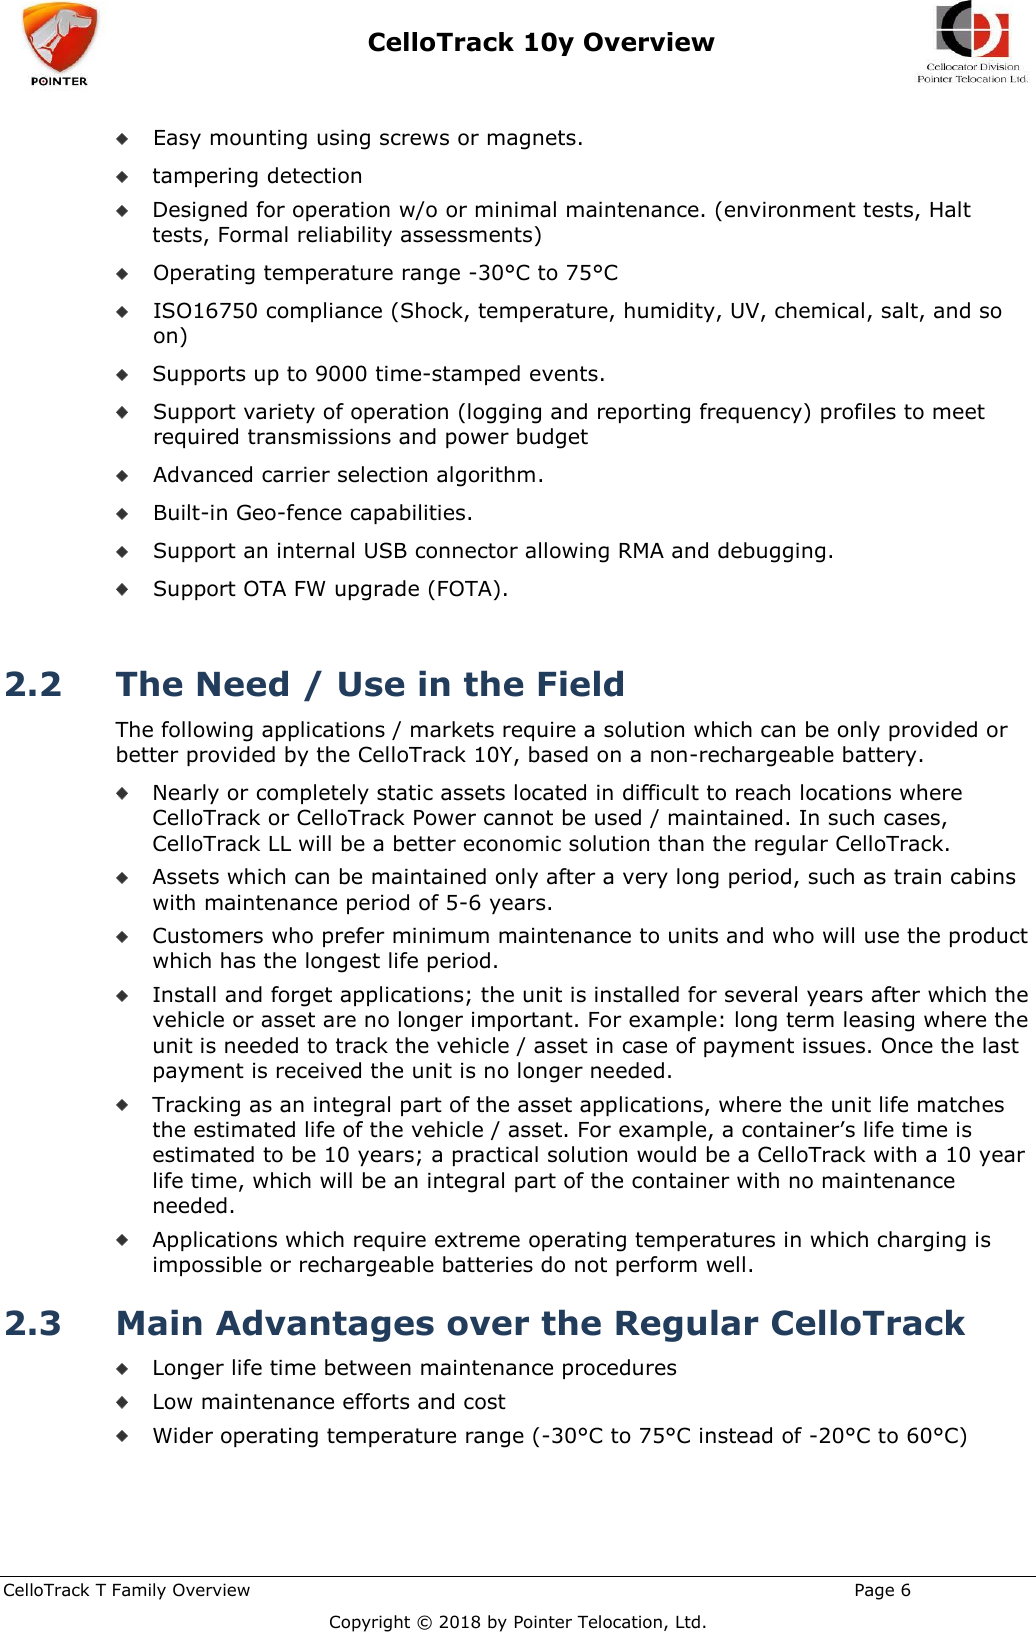  CelloTrack 10y Overview    CelloTrack T Family Overview                                                                                                       Page 6  Copyright © 2018 by Pointer Telocation, Ltd.  Easy mounting using screws or magnets.  tampering detection  Designed for operation w/o or minimal maintenance. (environment tests, Halt tests, Formal reliability assessments)  Operating temperature range -30°C to 75°C   ISO16750 compliance (Shock, temperature, humidity, UV, chemical, salt, and so on)  Supports up to 9000 time-stamped events.  Support variety of operation (logging and reporting frequency) profiles to meet required transmissions and power budget  Advanced carrier selection algorithm.   Built-in Geo-fence capabilities.  Support an internal USB connector allowing RMA and debugging.  Support OTA FW upgrade (FOTA).  2.2 The Need / Use in the Field  The following applications / markets require a solution which can be only provided or better provided by the CelloTrack 10Y, based on a non-rechargeable battery.  Nearly or completely static assets located in difficult to reach locations where CelloTrack or CelloTrack Power cannot be used / maintained. In such cases, CelloTrack LL will be a better economic solution than the regular CelloTrack.  Assets which can be maintained only after a very long period, such as train cabins with maintenance period of 5-6 years.  Customers who prefer minimum maintenance to units and who will use the product which has the longest life period.  Install and forget applications; the unit is installed for several years after which the vehicle or asset are no longer important. For example: long term leasing where the unit is needed to track the vehicle / asset in case of payment issues. Once the last payment is received the unit is no longer needed.  Tracking as an integral part of the asset applications, where the unit life matches the estimated life of the vehicle / asset. For example, a container’s life time is estimated to be 10 years; a practical solution would be a CelloTrack with a 10 year life time, which will be an integral part of the container with no maintenance needed.  Applications which require extreme operating temperatures in which charging is impossible or rechargeable batteries do not perform well. 2.3 Main Advantages over the Regular CelloTrack  Longer life time between maintenance procedures  Low maintenance efforts and cost  Wider operating temperature range (-30°C to 75°C instead of -20°C to 60°C) 